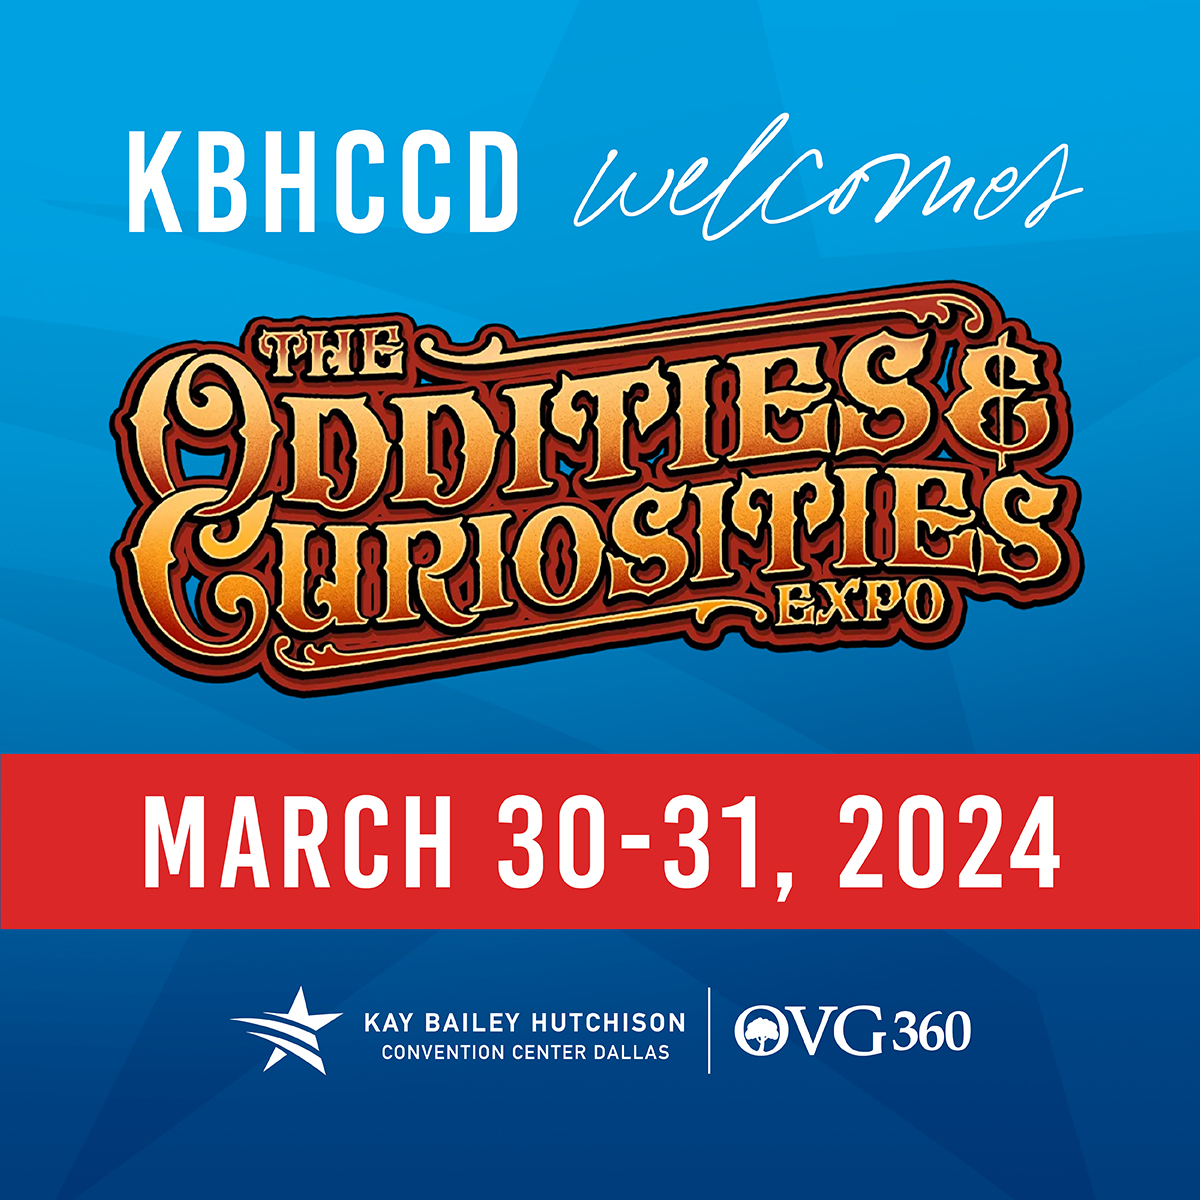 Calling all lovers of the strange and unusual! Unleash your love for the peculiar this weekend at the Oddities & Curiosities Expo at #KBHCCD!

Still need a ticket? 👉 bit.ly/OdditiesandCur…
Location 📍: Exhibit Hall A
Retail/Concessions Menu 🍴: bit.ly/OdditiesandCur…